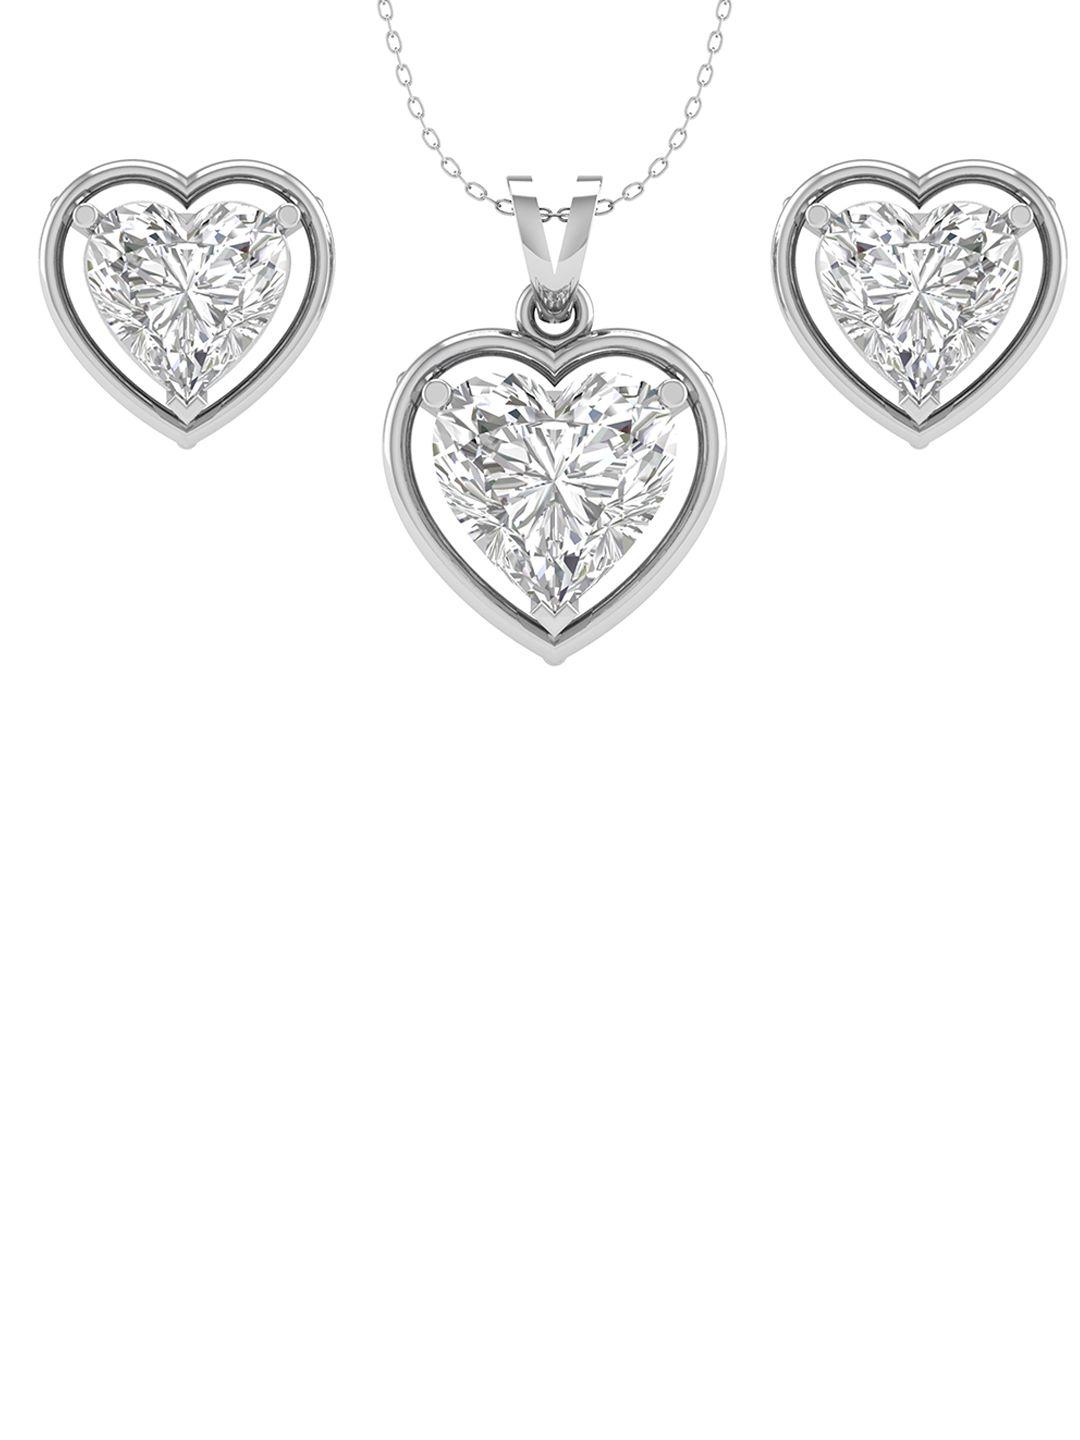 orionz silver-plated jewellery set